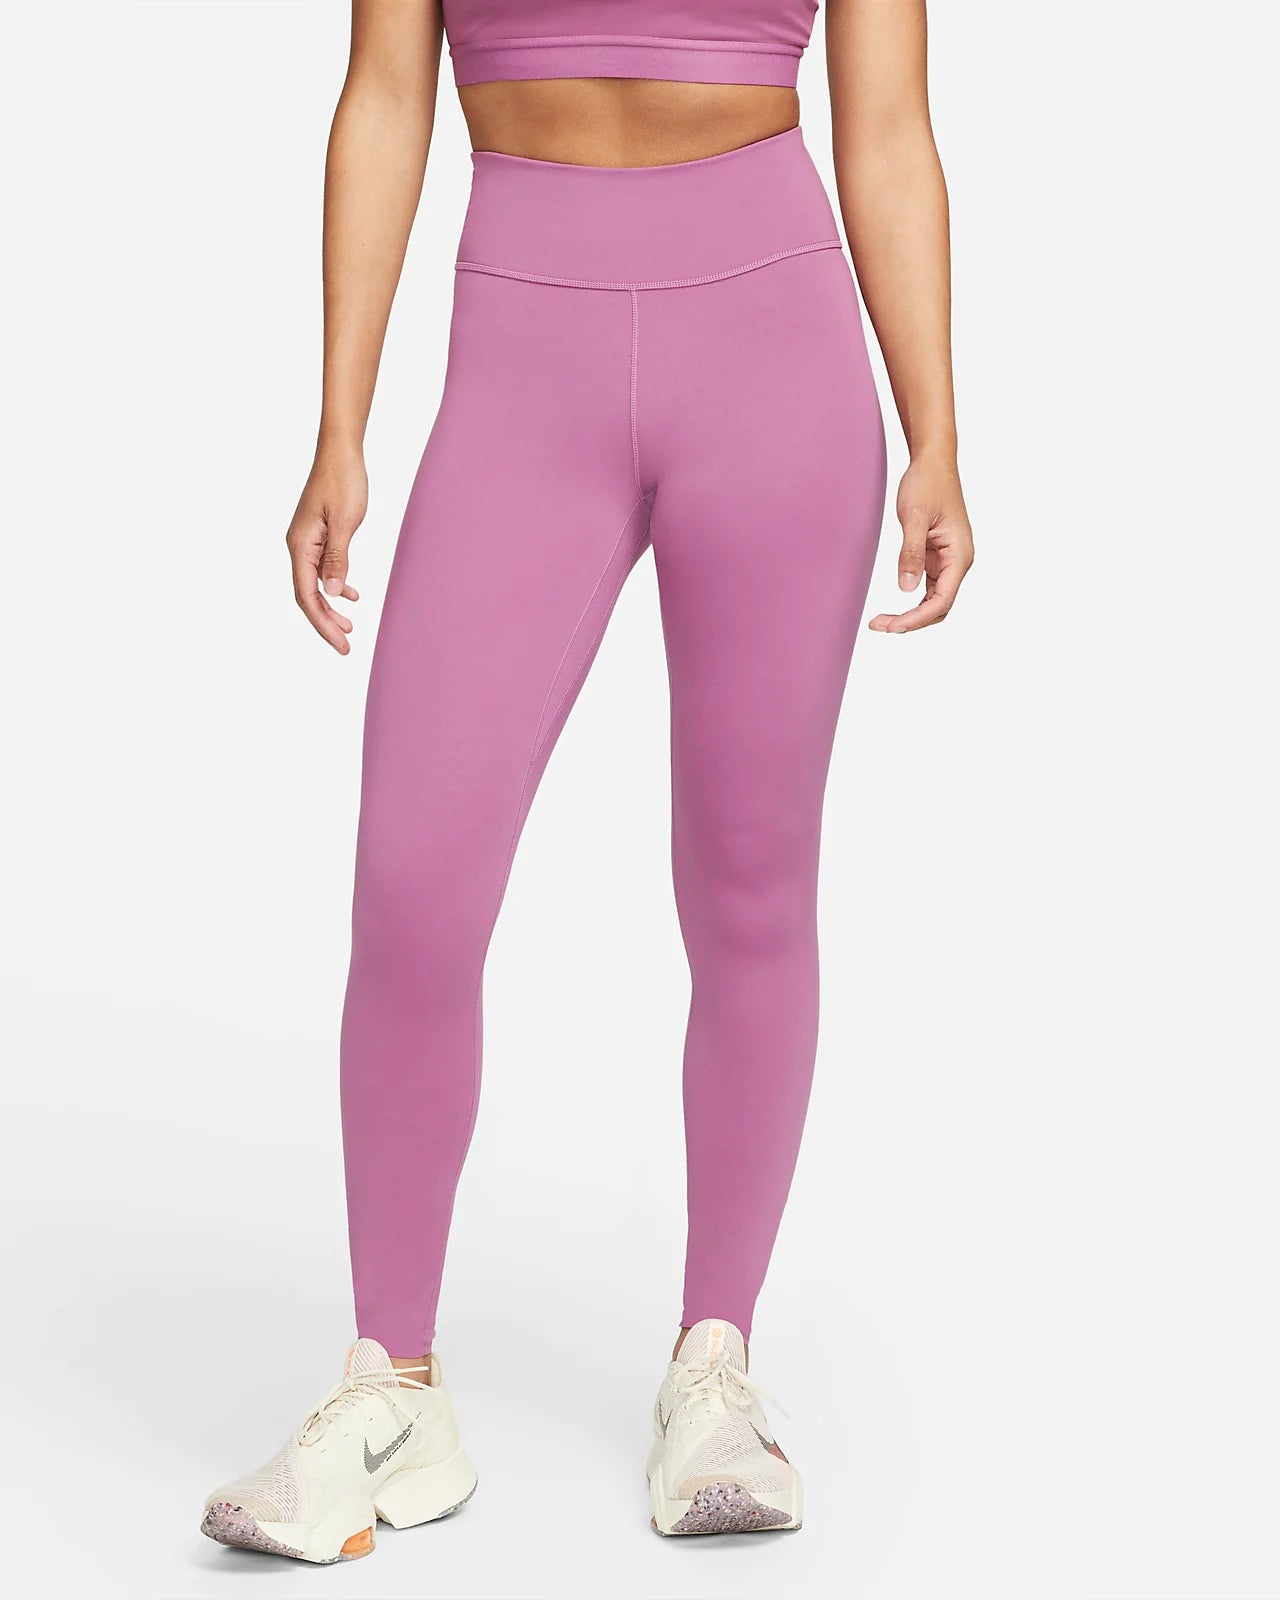 Nike One Luxe Women's Tights AT3098-515 Pink (Dusty Rose/Mauve